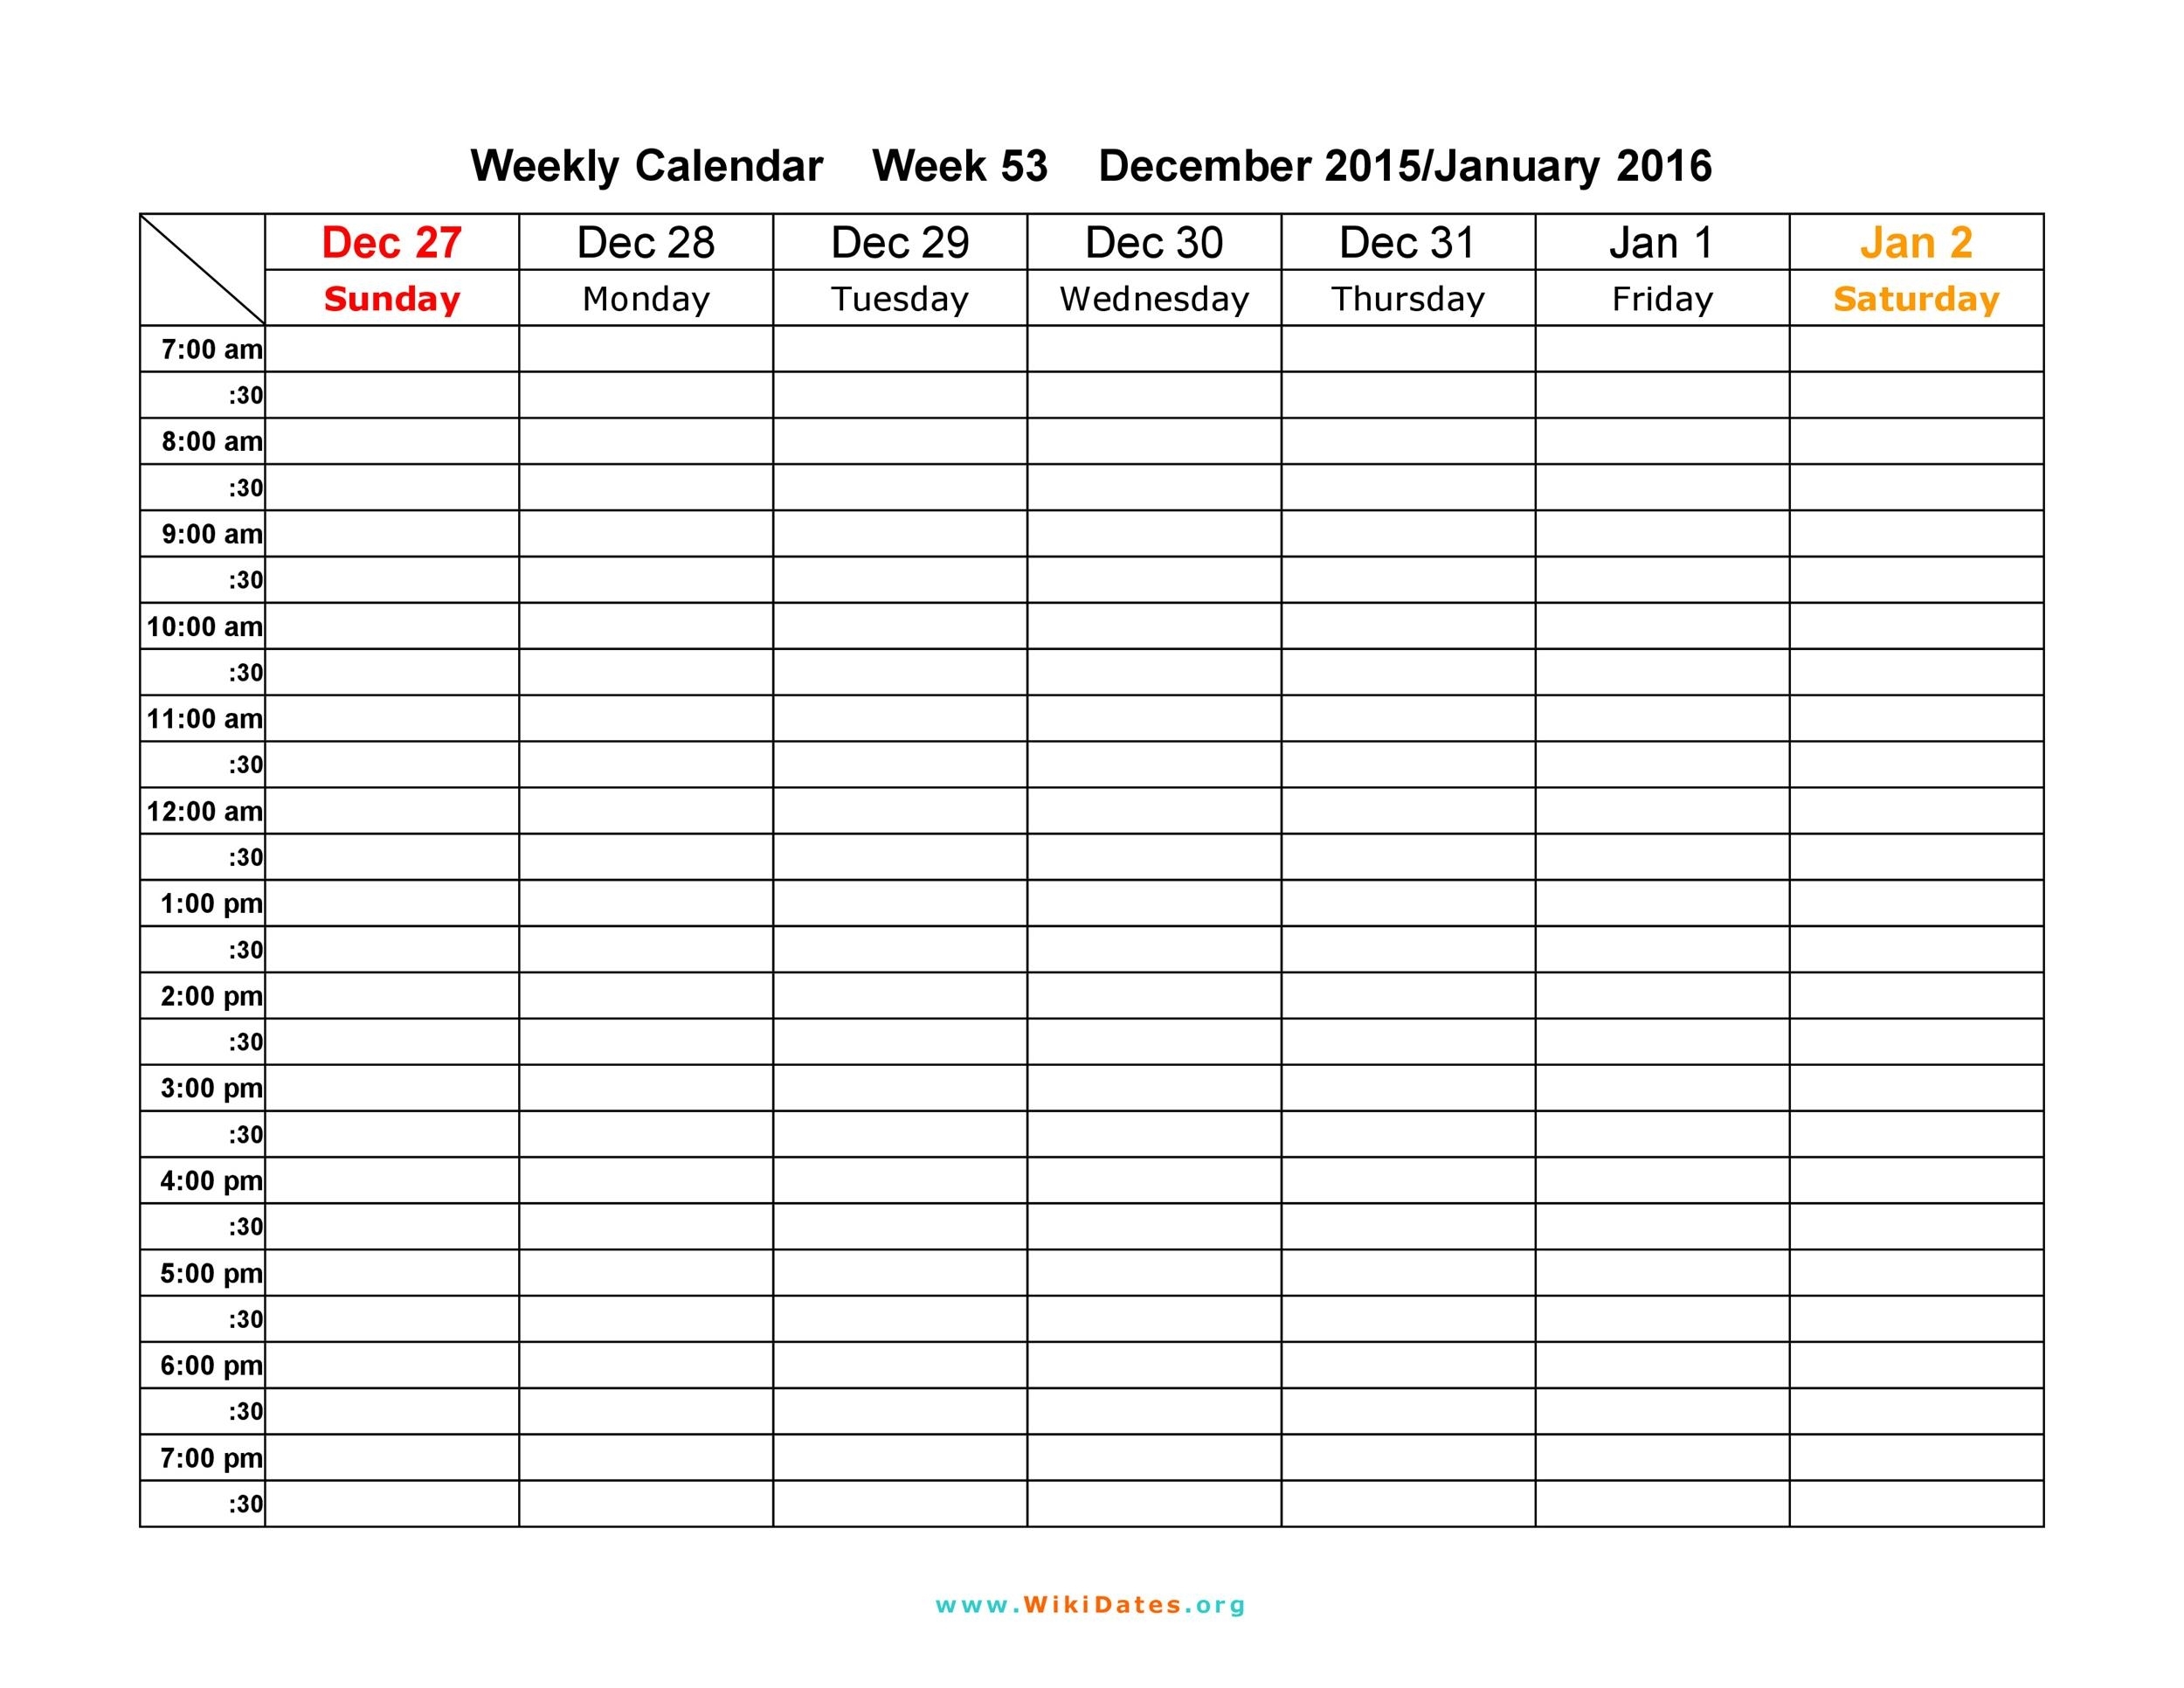 Collect Am Pm Weekly Calendar